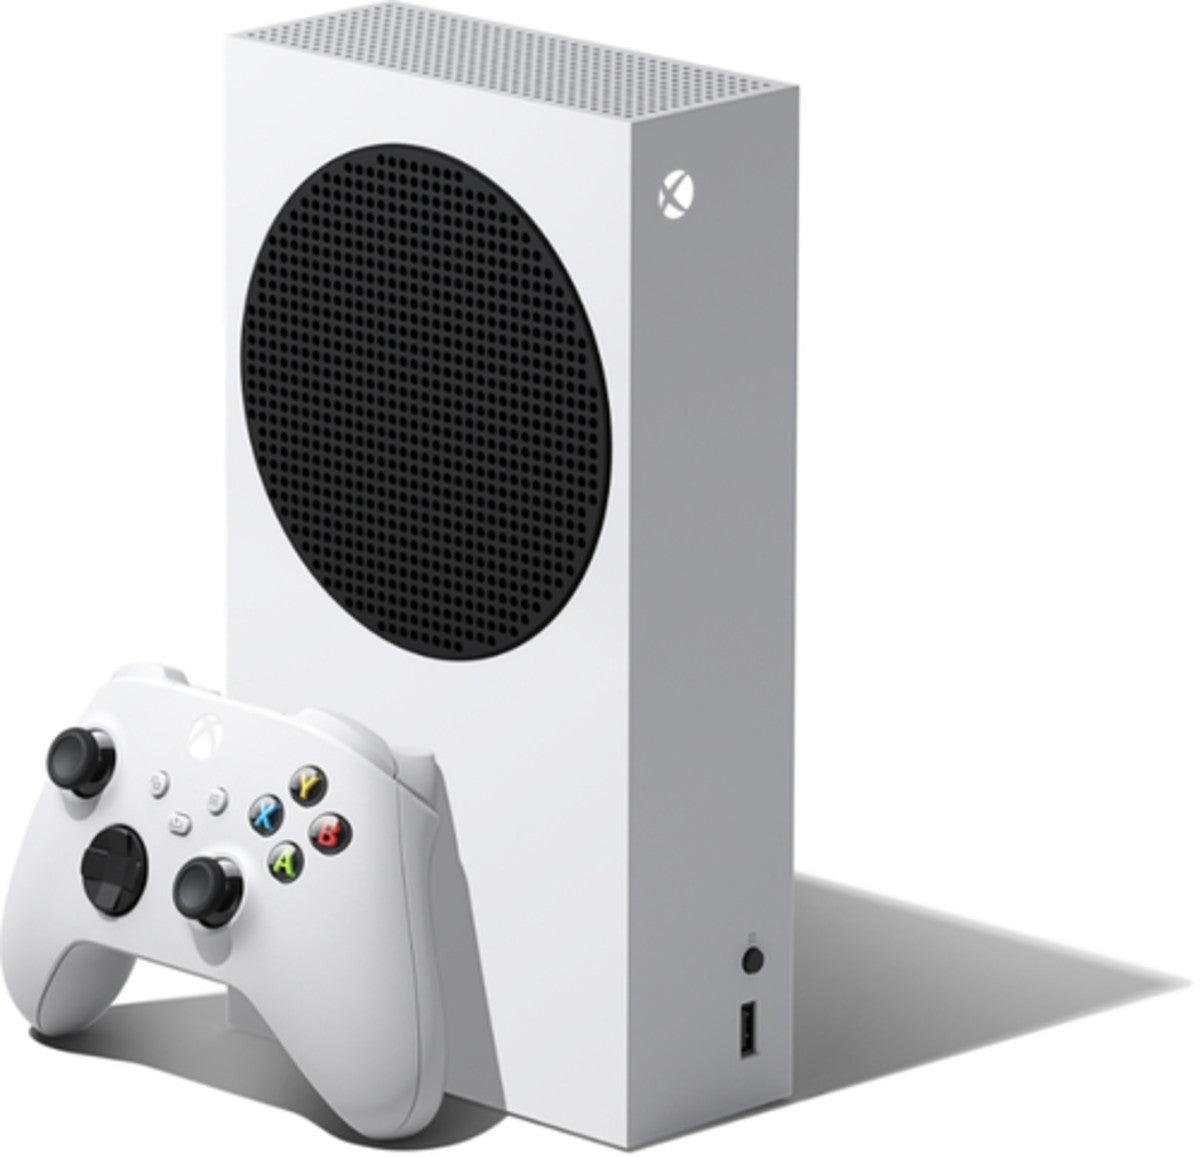 Xbox Series S 512GB Digital Console - Want a New Gadget